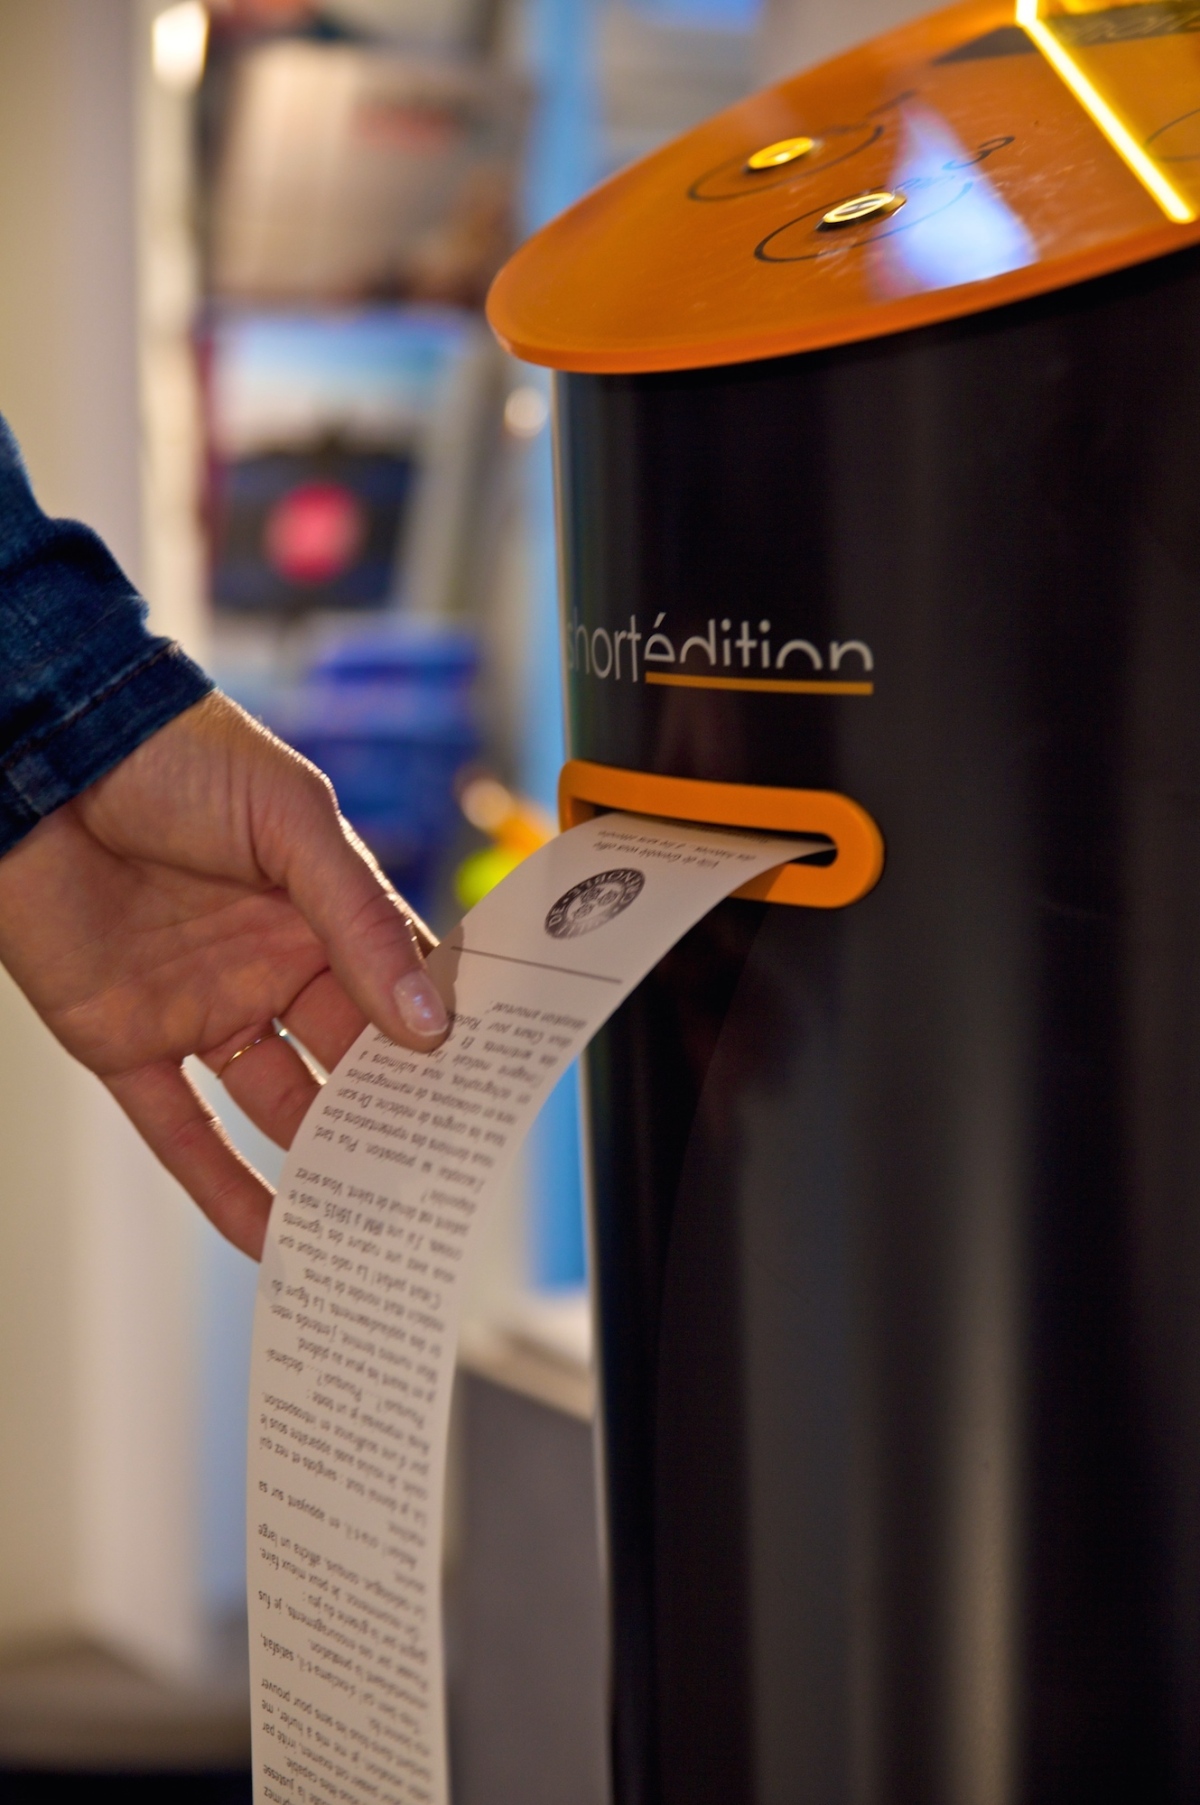 GOOD.IS: Instead of Snacks, This Vending Machine Spits Out Short Stories